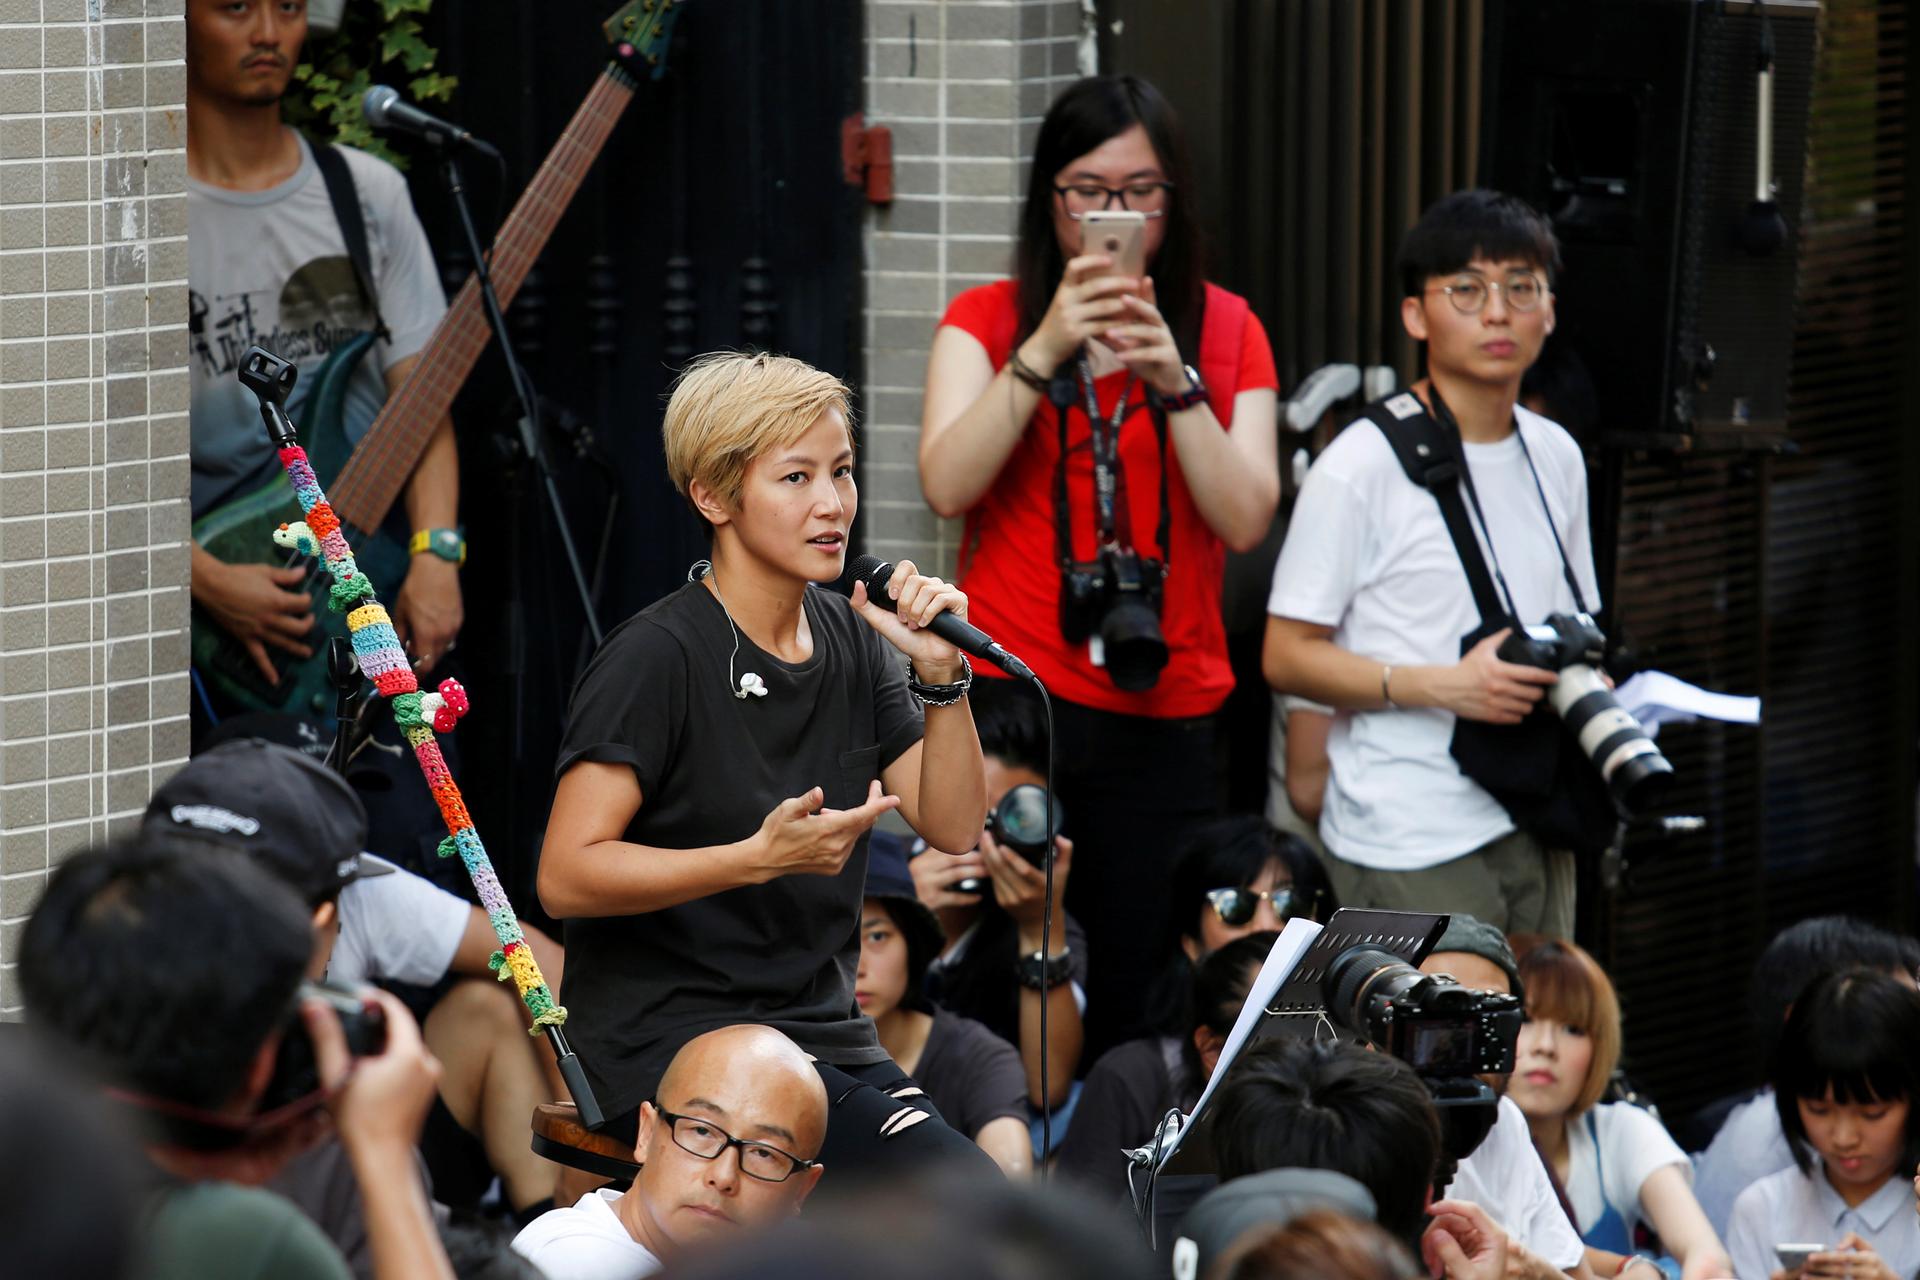 A woman holds a microphone in a crowd.